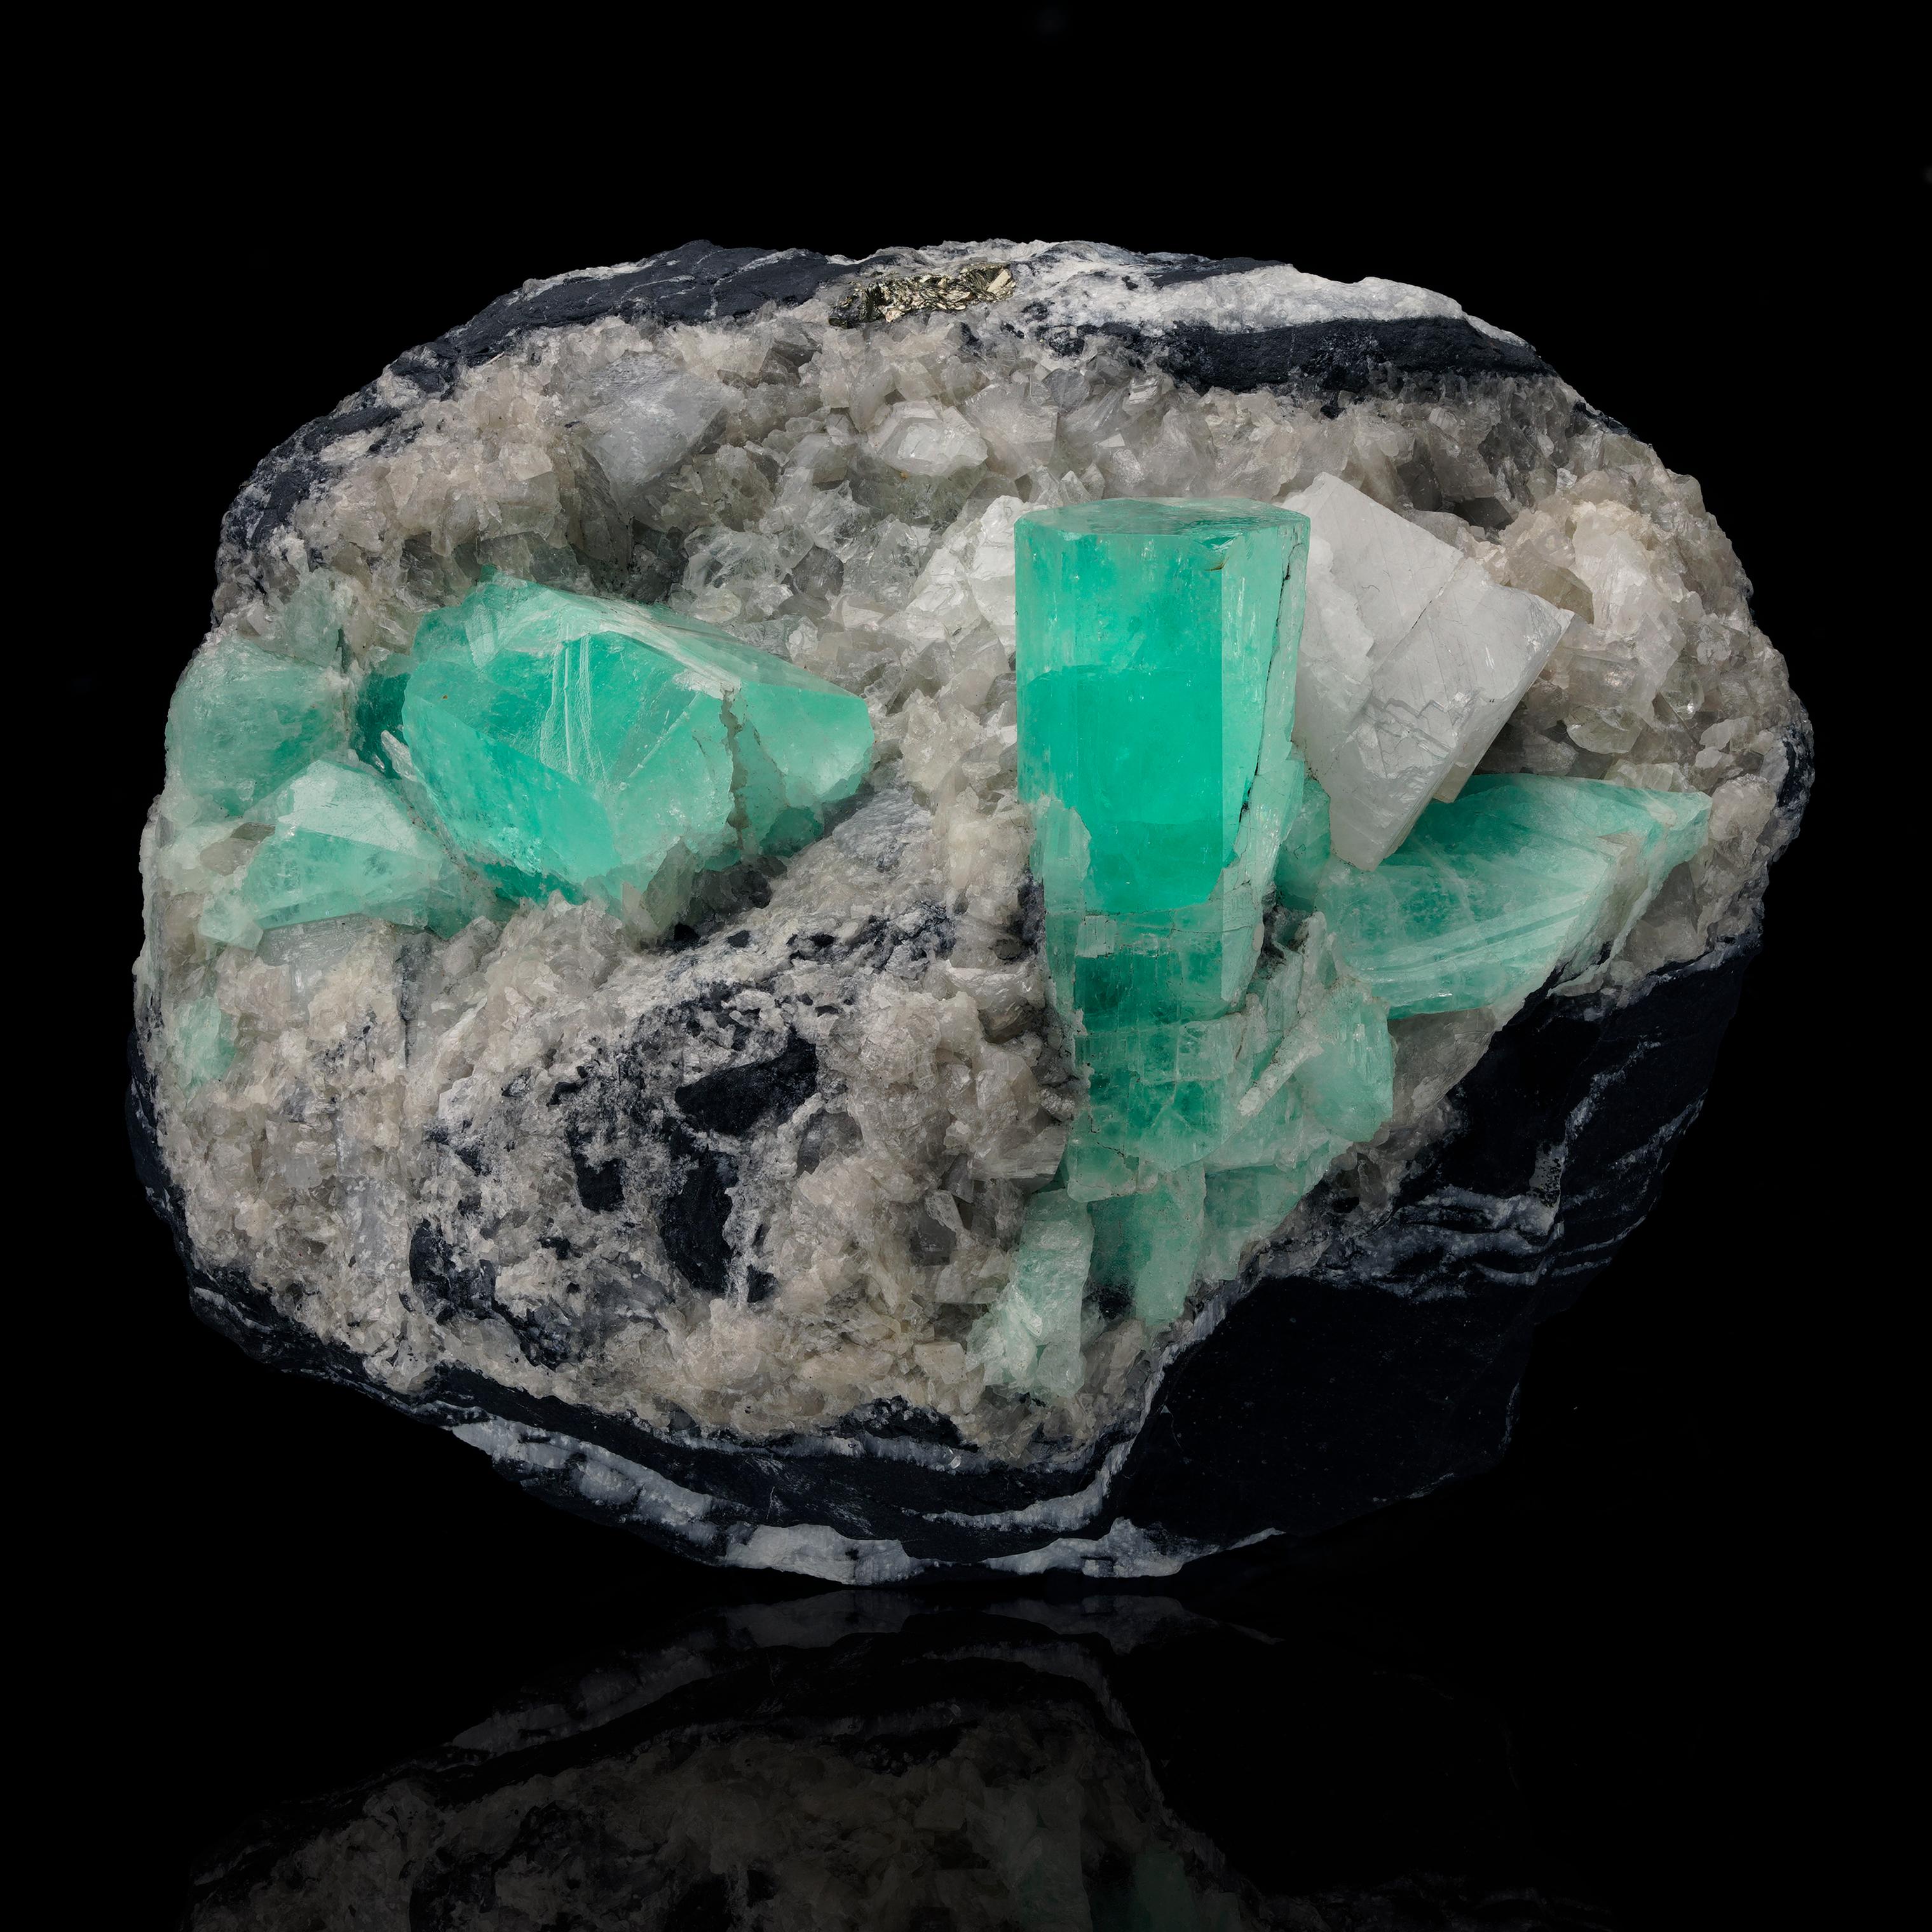 This true museum quality 1.74 lb. combination specimen from the Muzo emerald mines in Colombia features two large beautifully formed emerald crystals – each measuring approximately 1-1/2